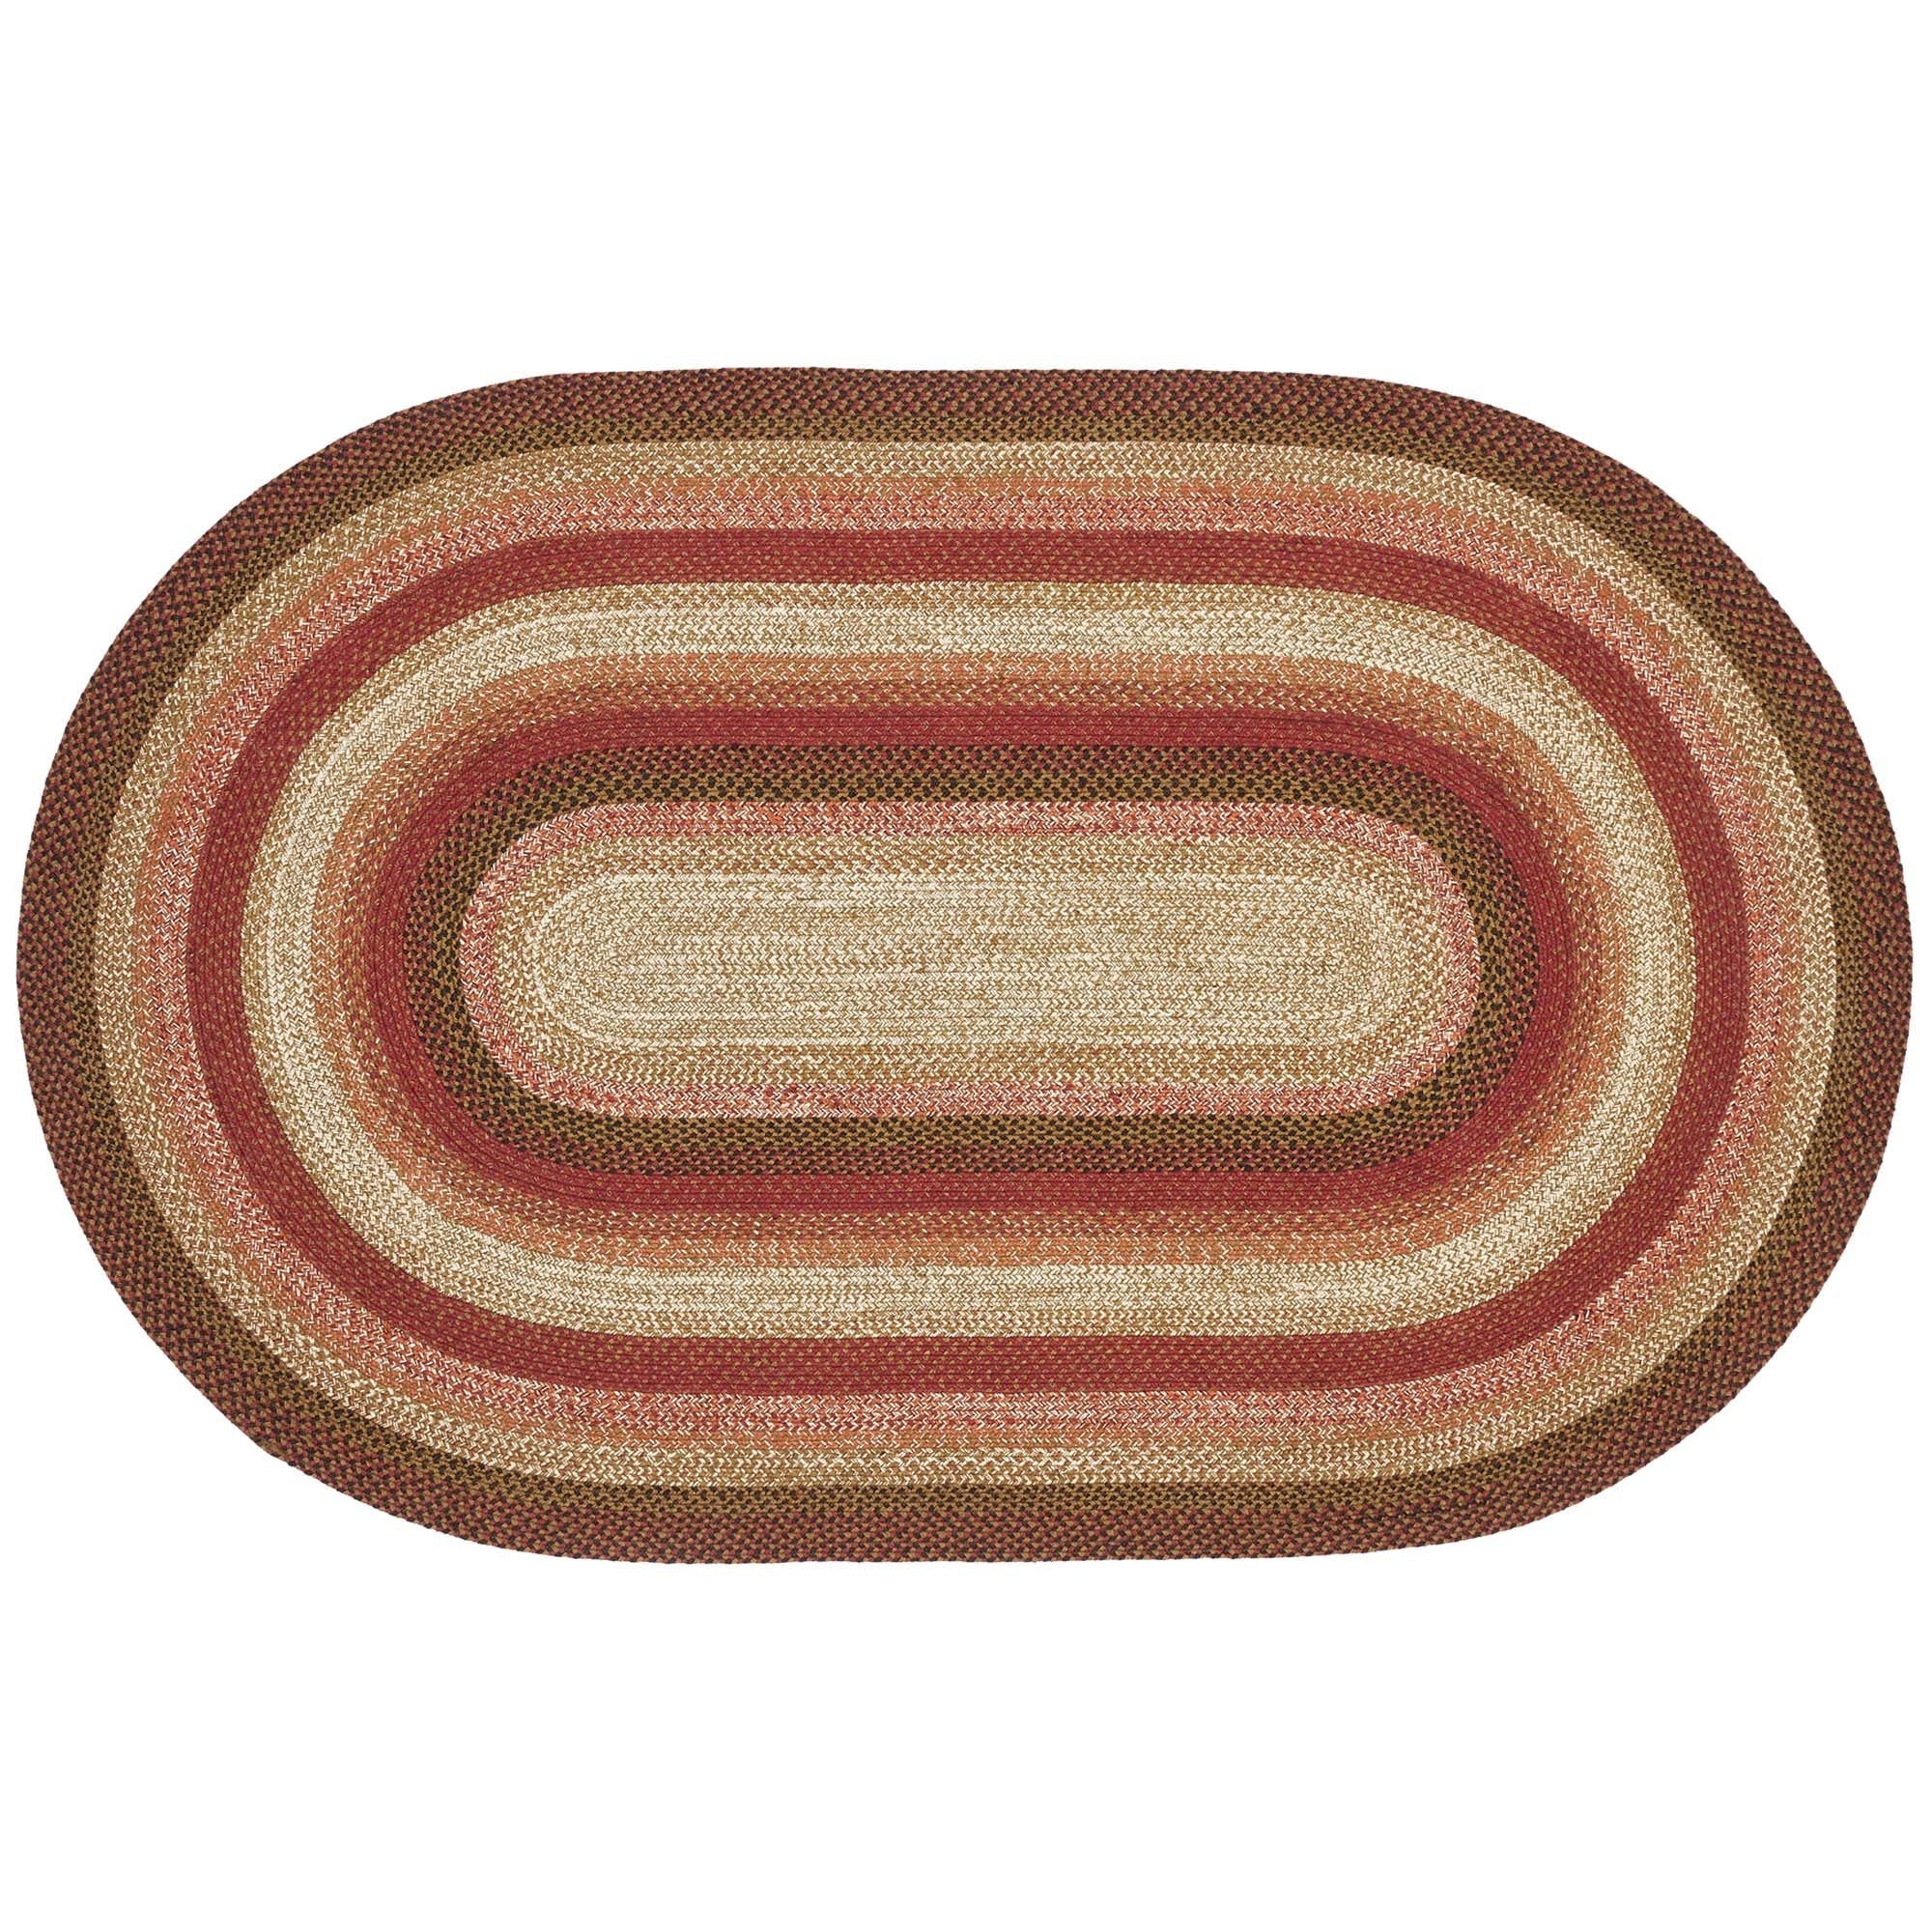 Ginger Spice Jute Braided Rug Oval with Rug Pad 5'x8' VHC Brands